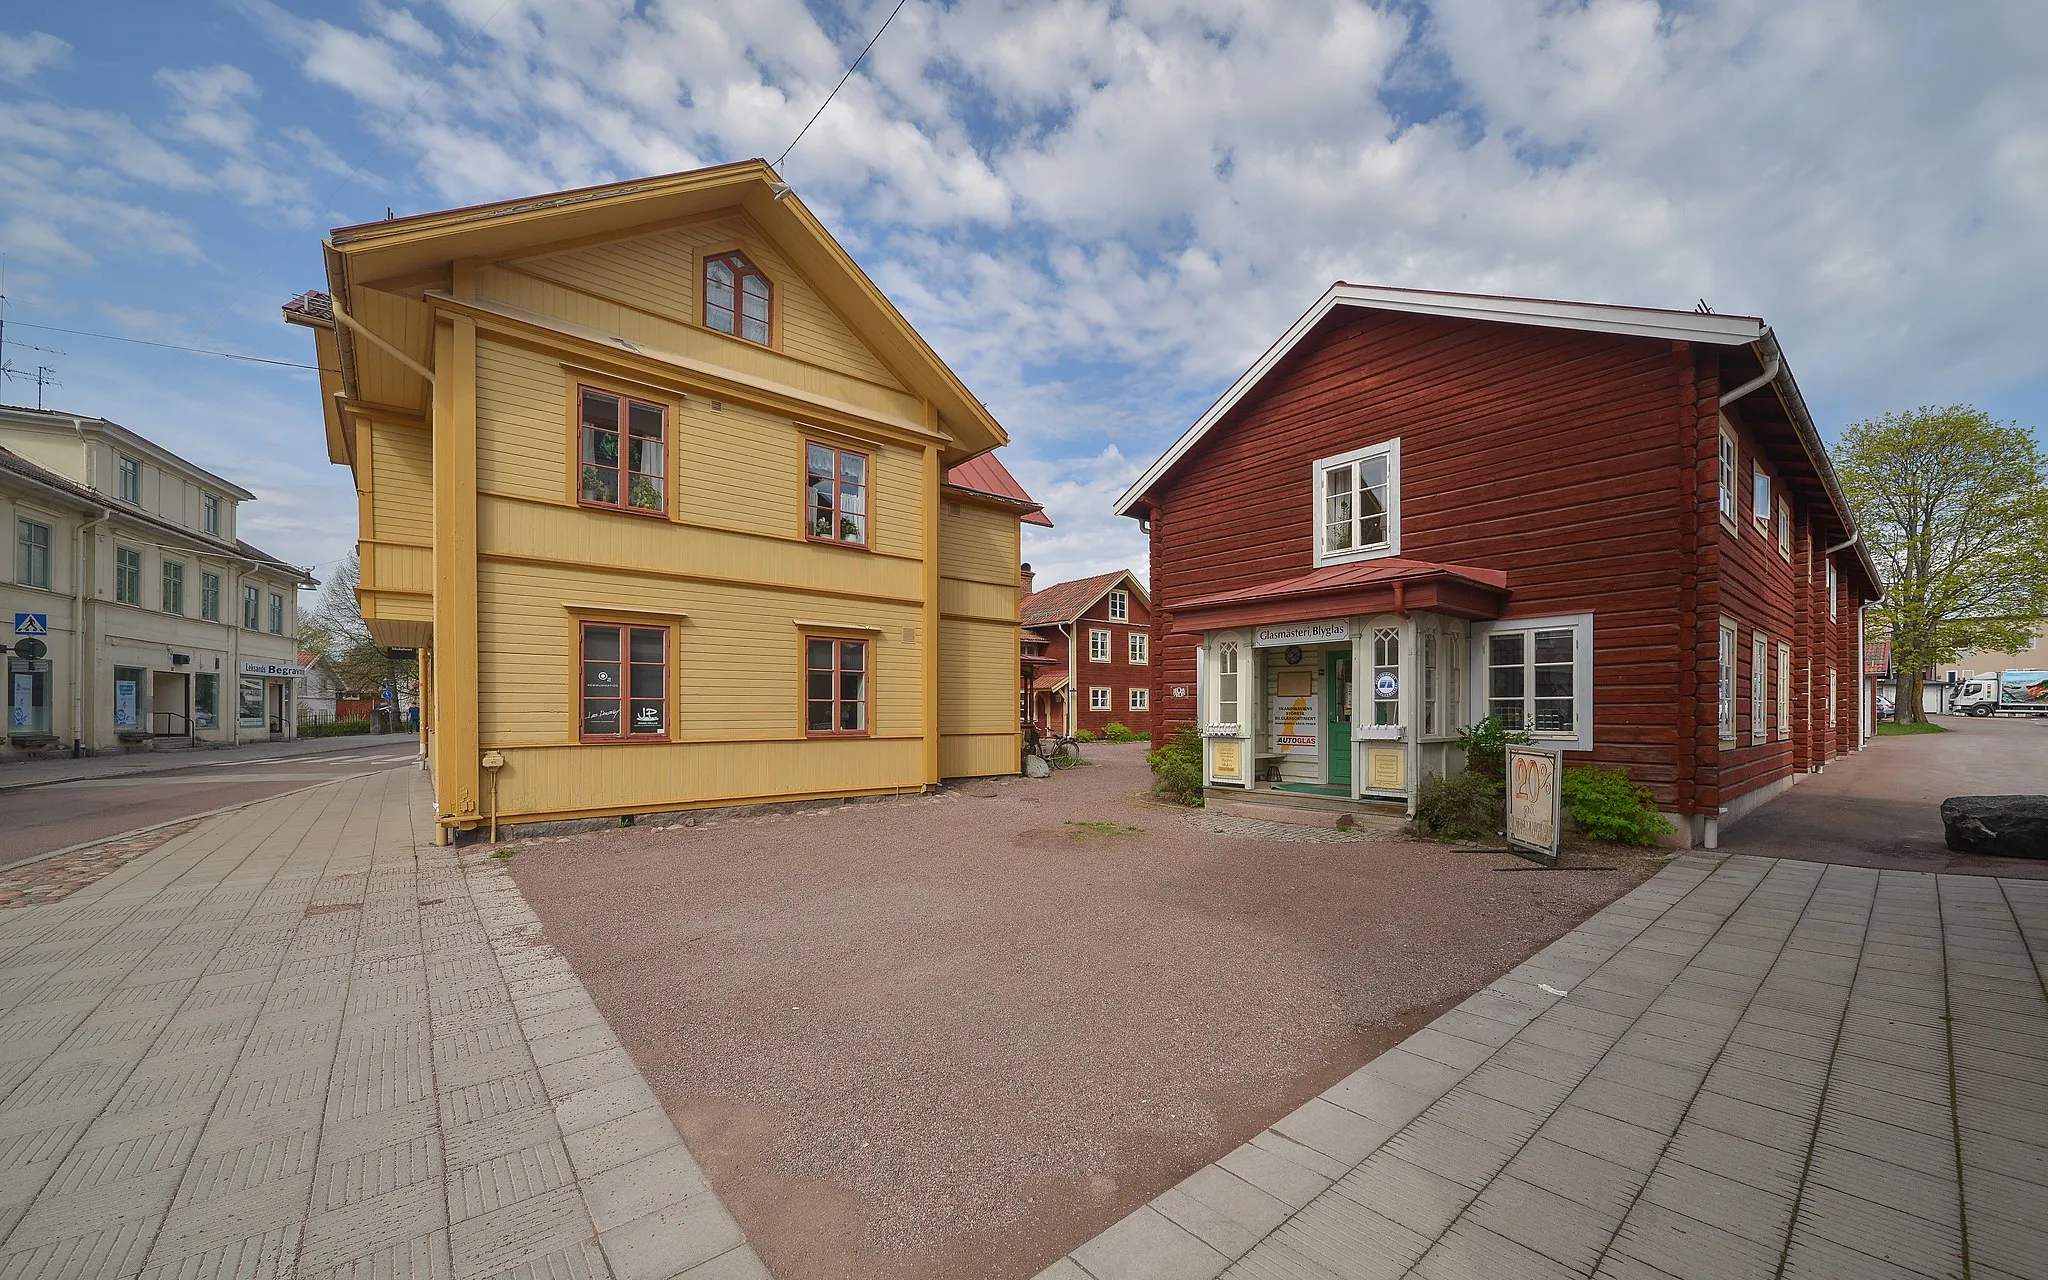 Photo showing: Buildings in Leksand.